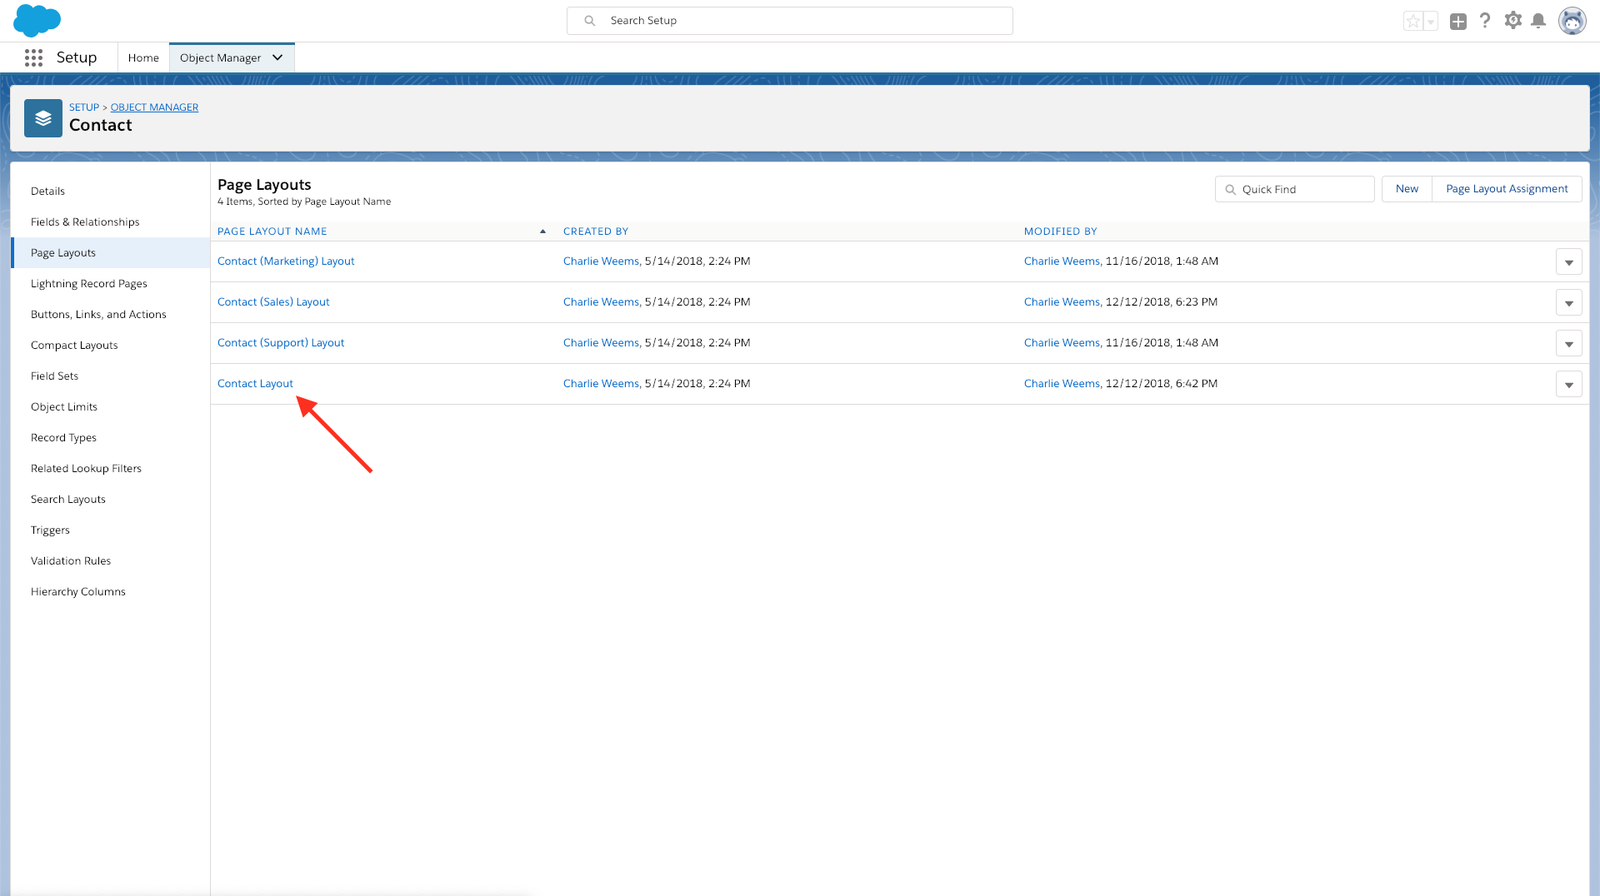 Contact Layout Page Layout for Contacts in Salesforce.